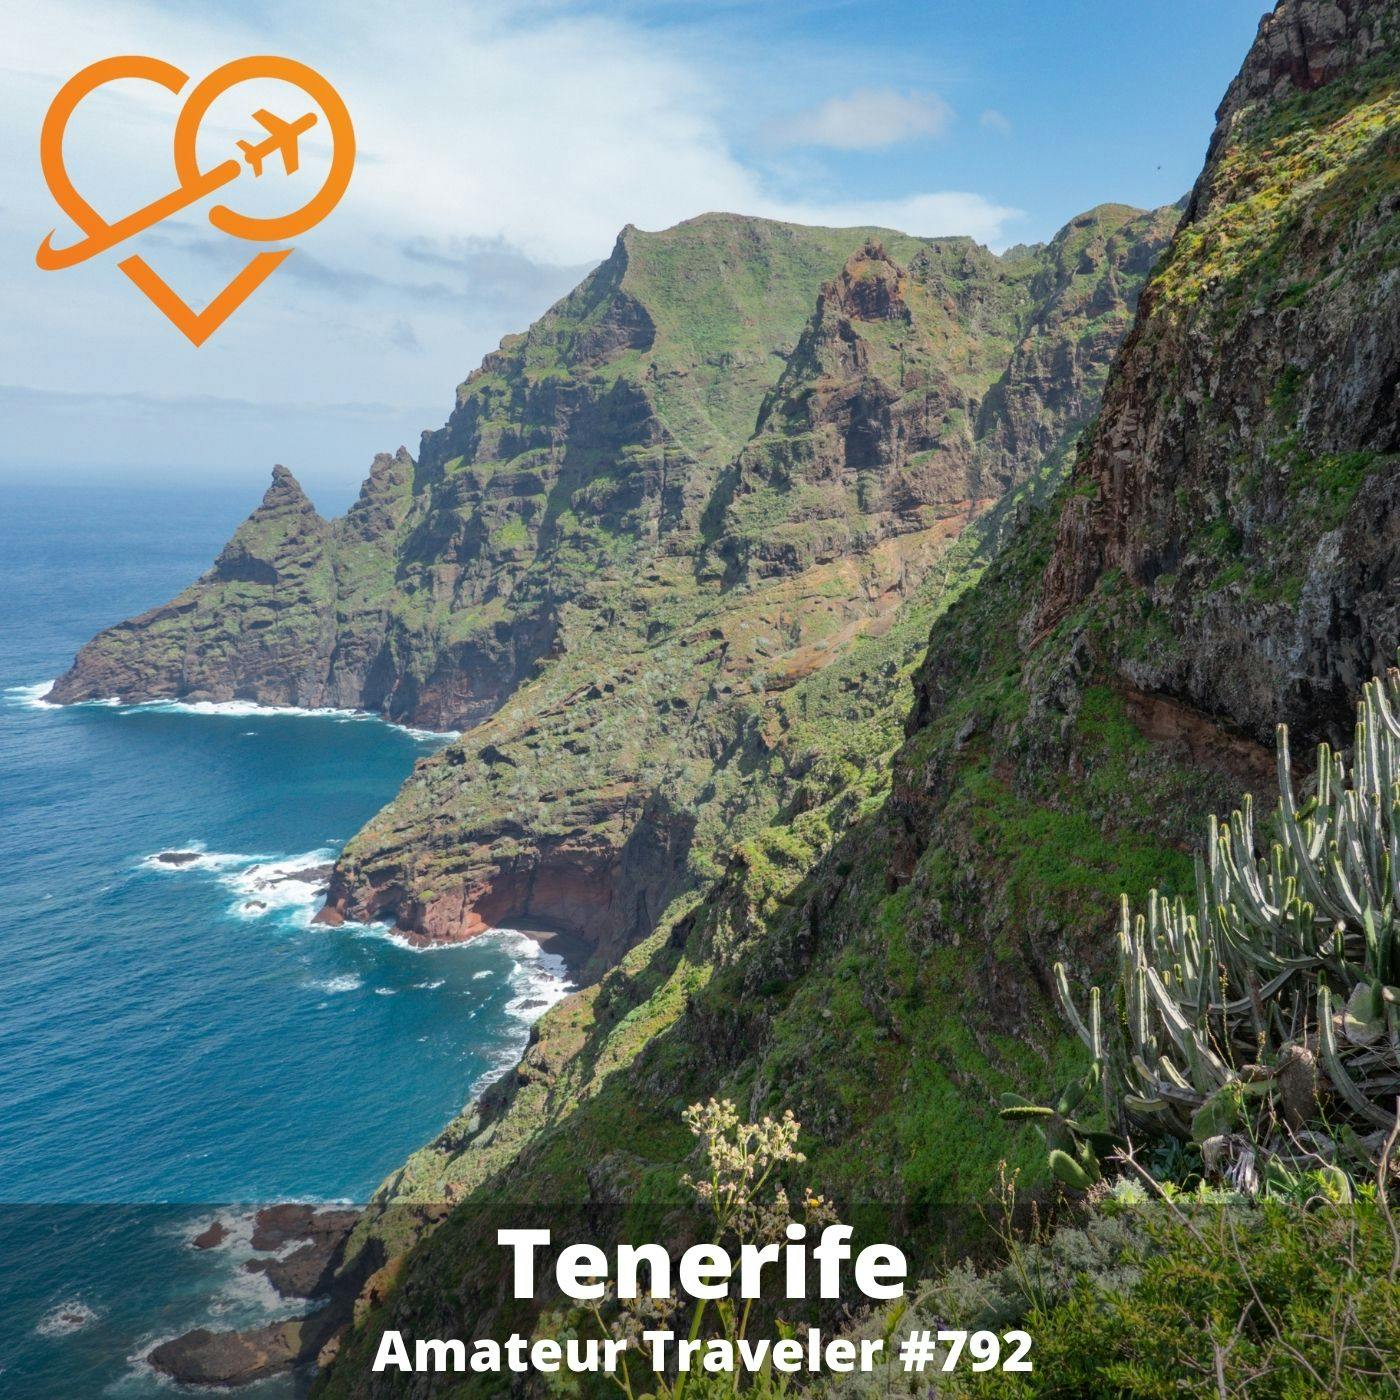 AT#792 - Travel to Tenerife